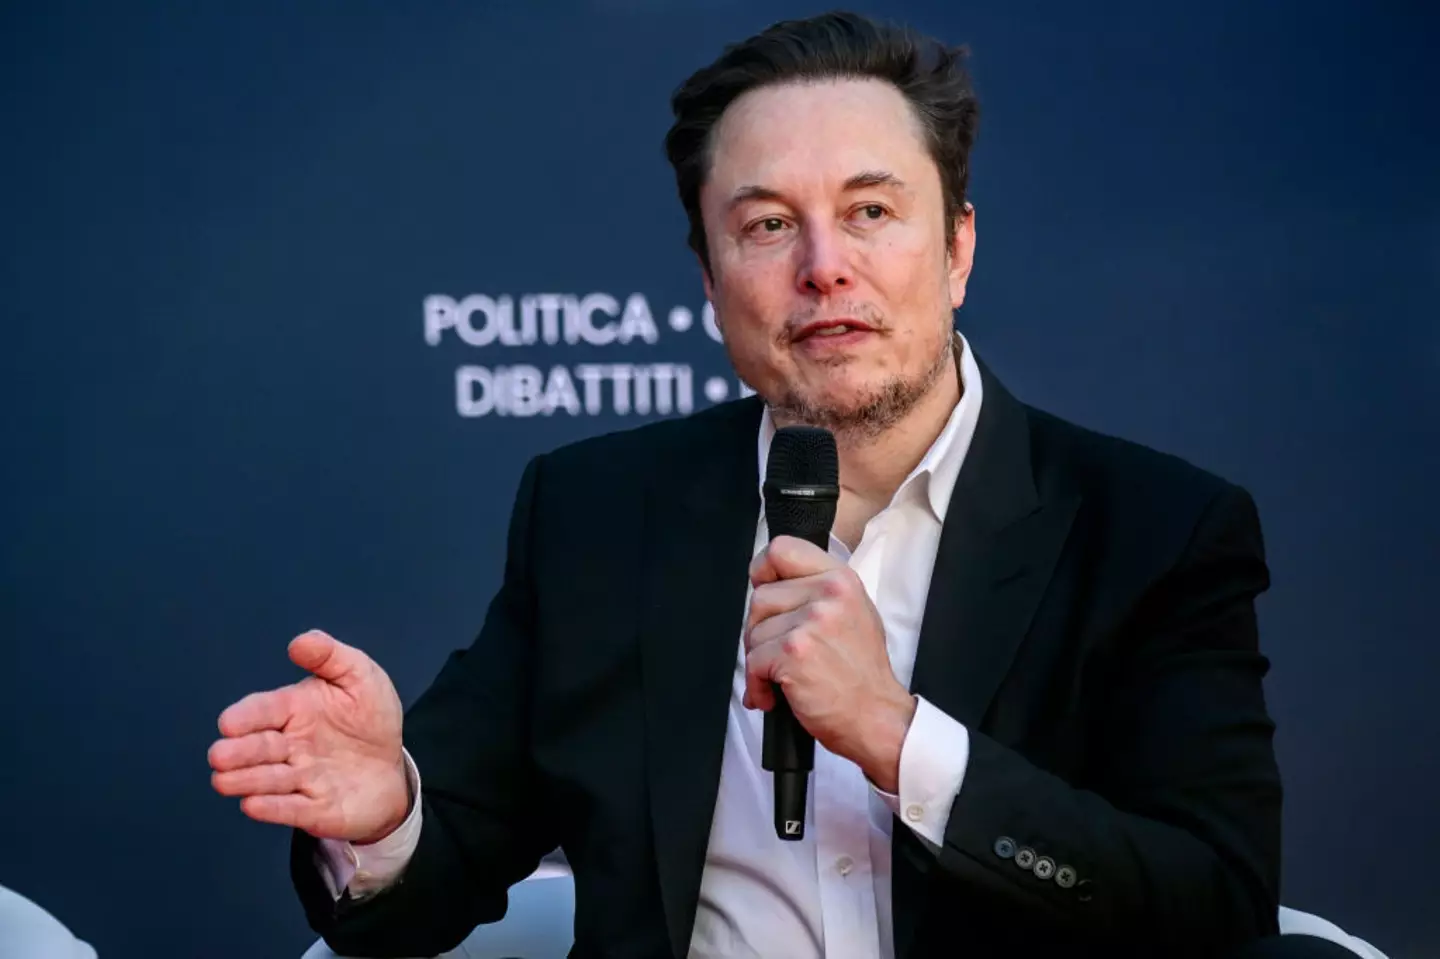 Elon Musk has got some plans for where he'd like to pass away.